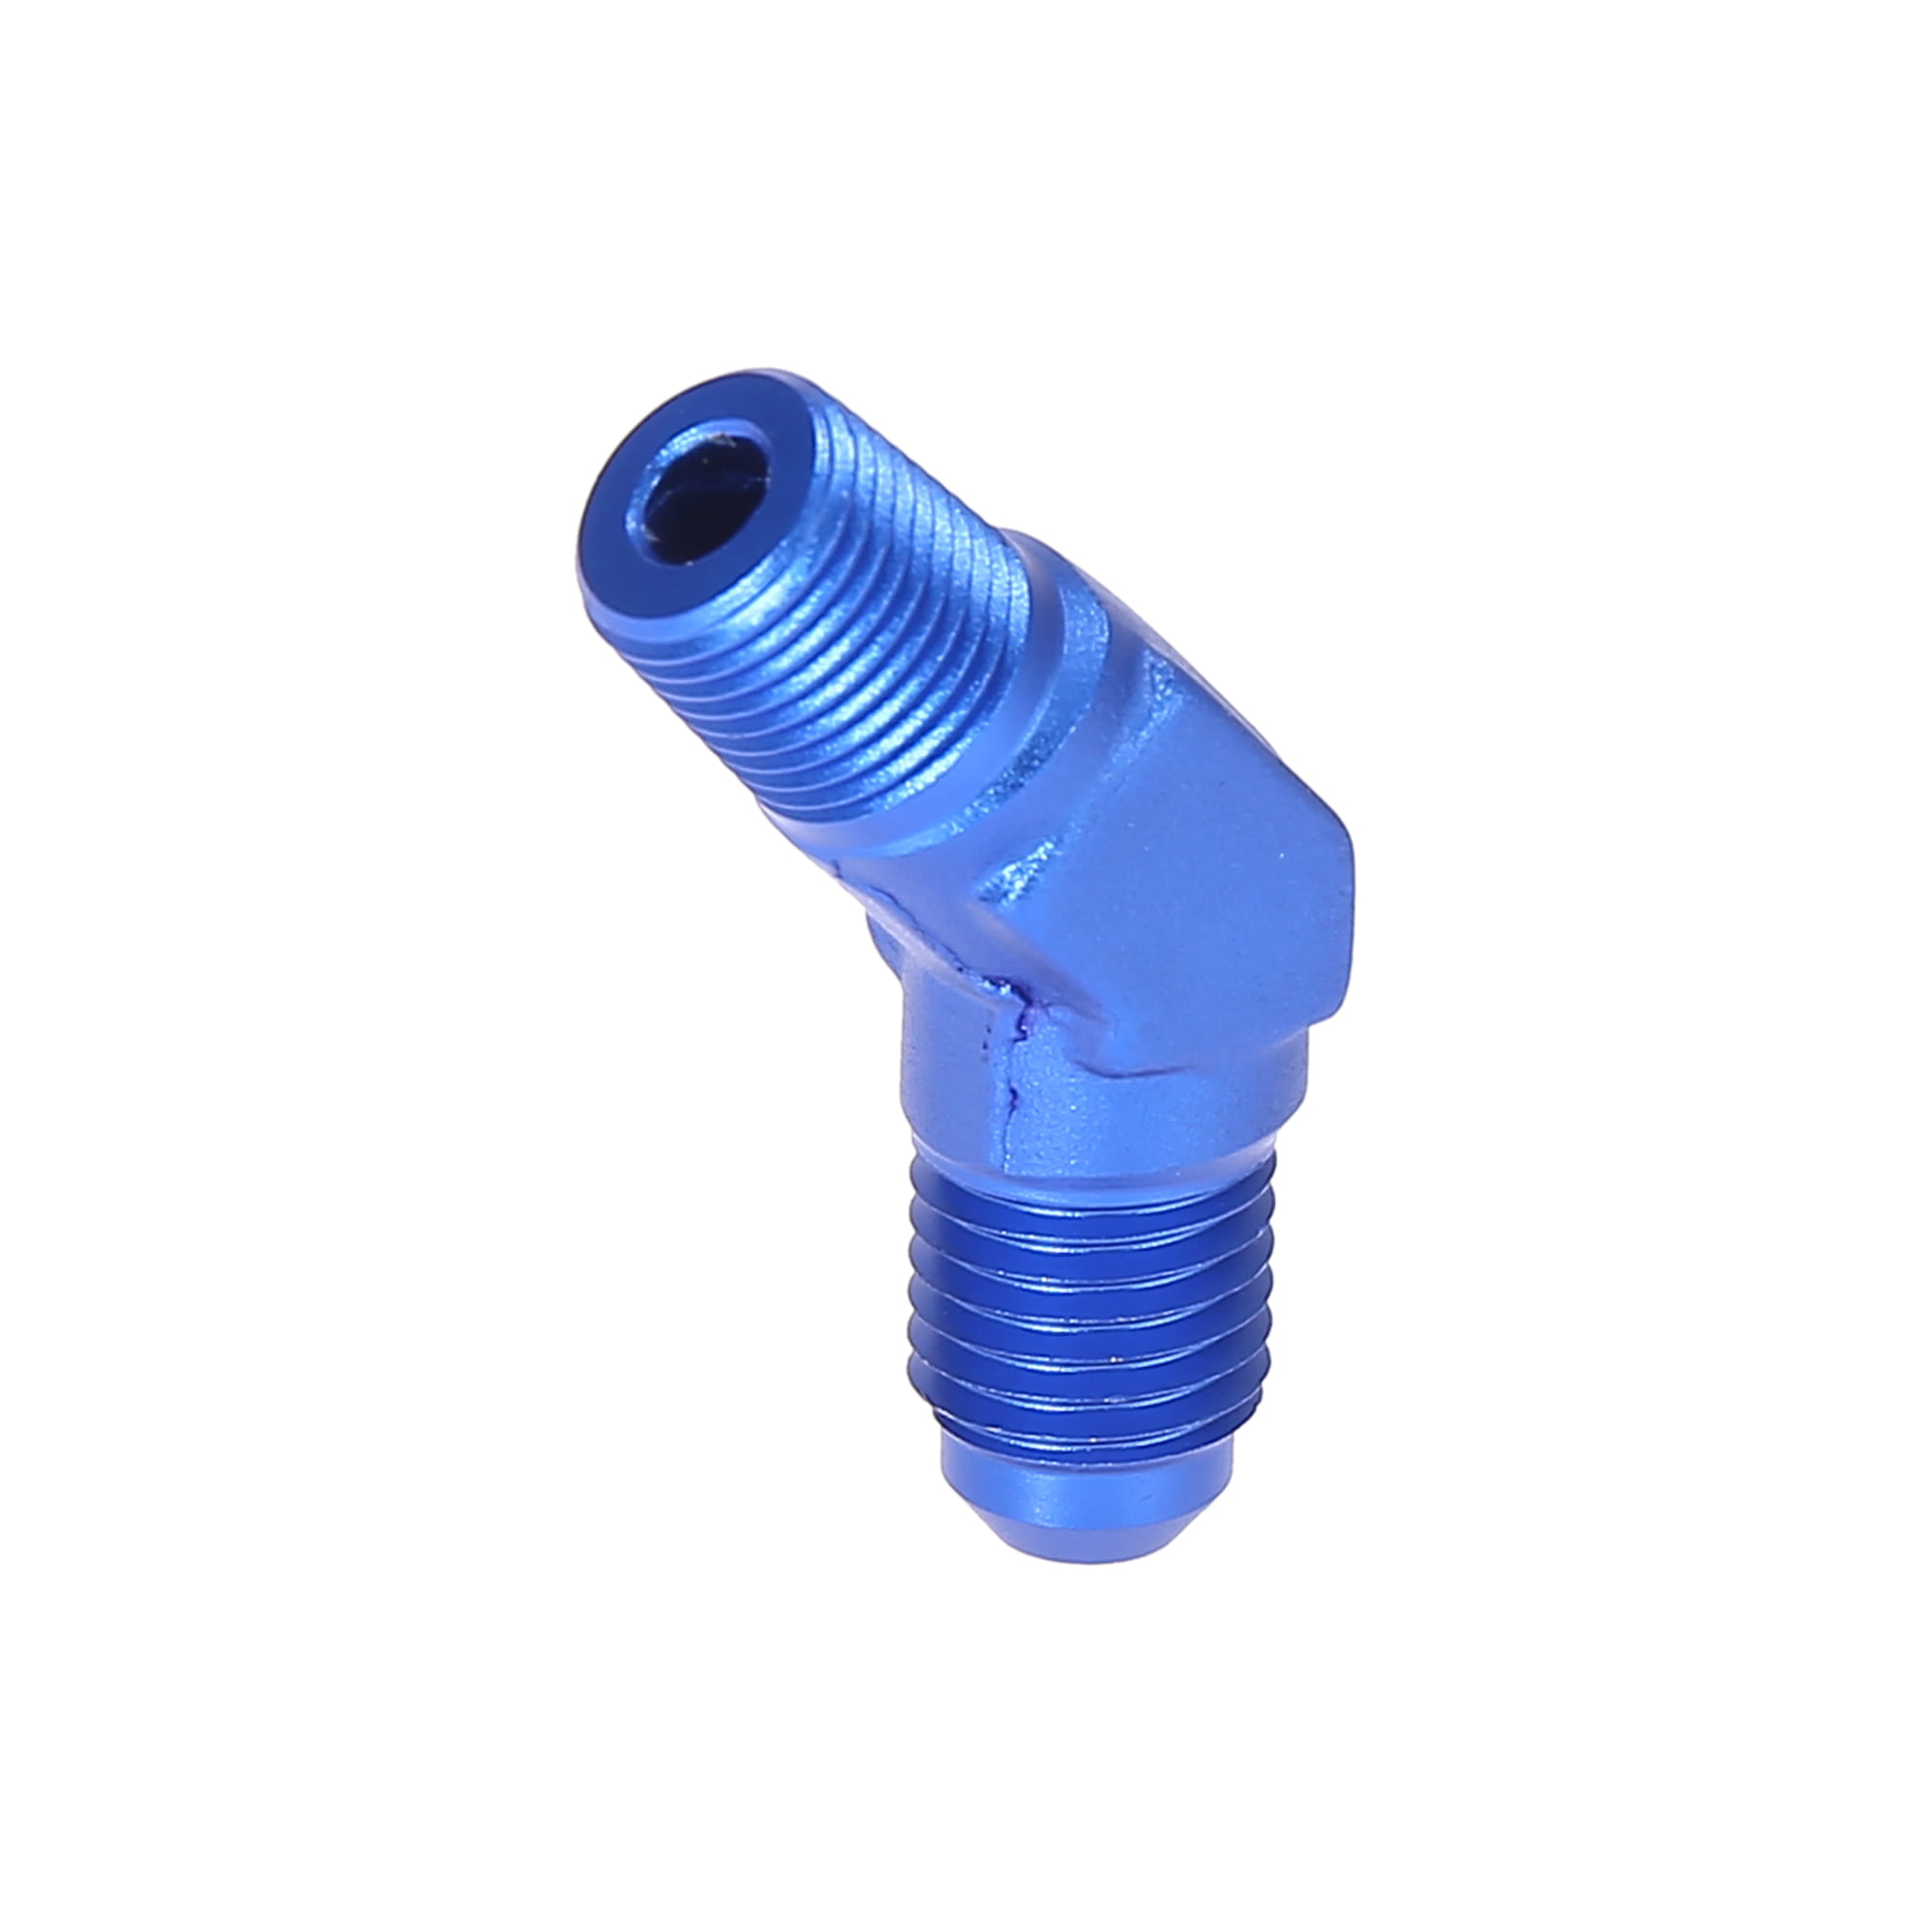 08 45 degree male adapter to 1/2" NPT male Blue 